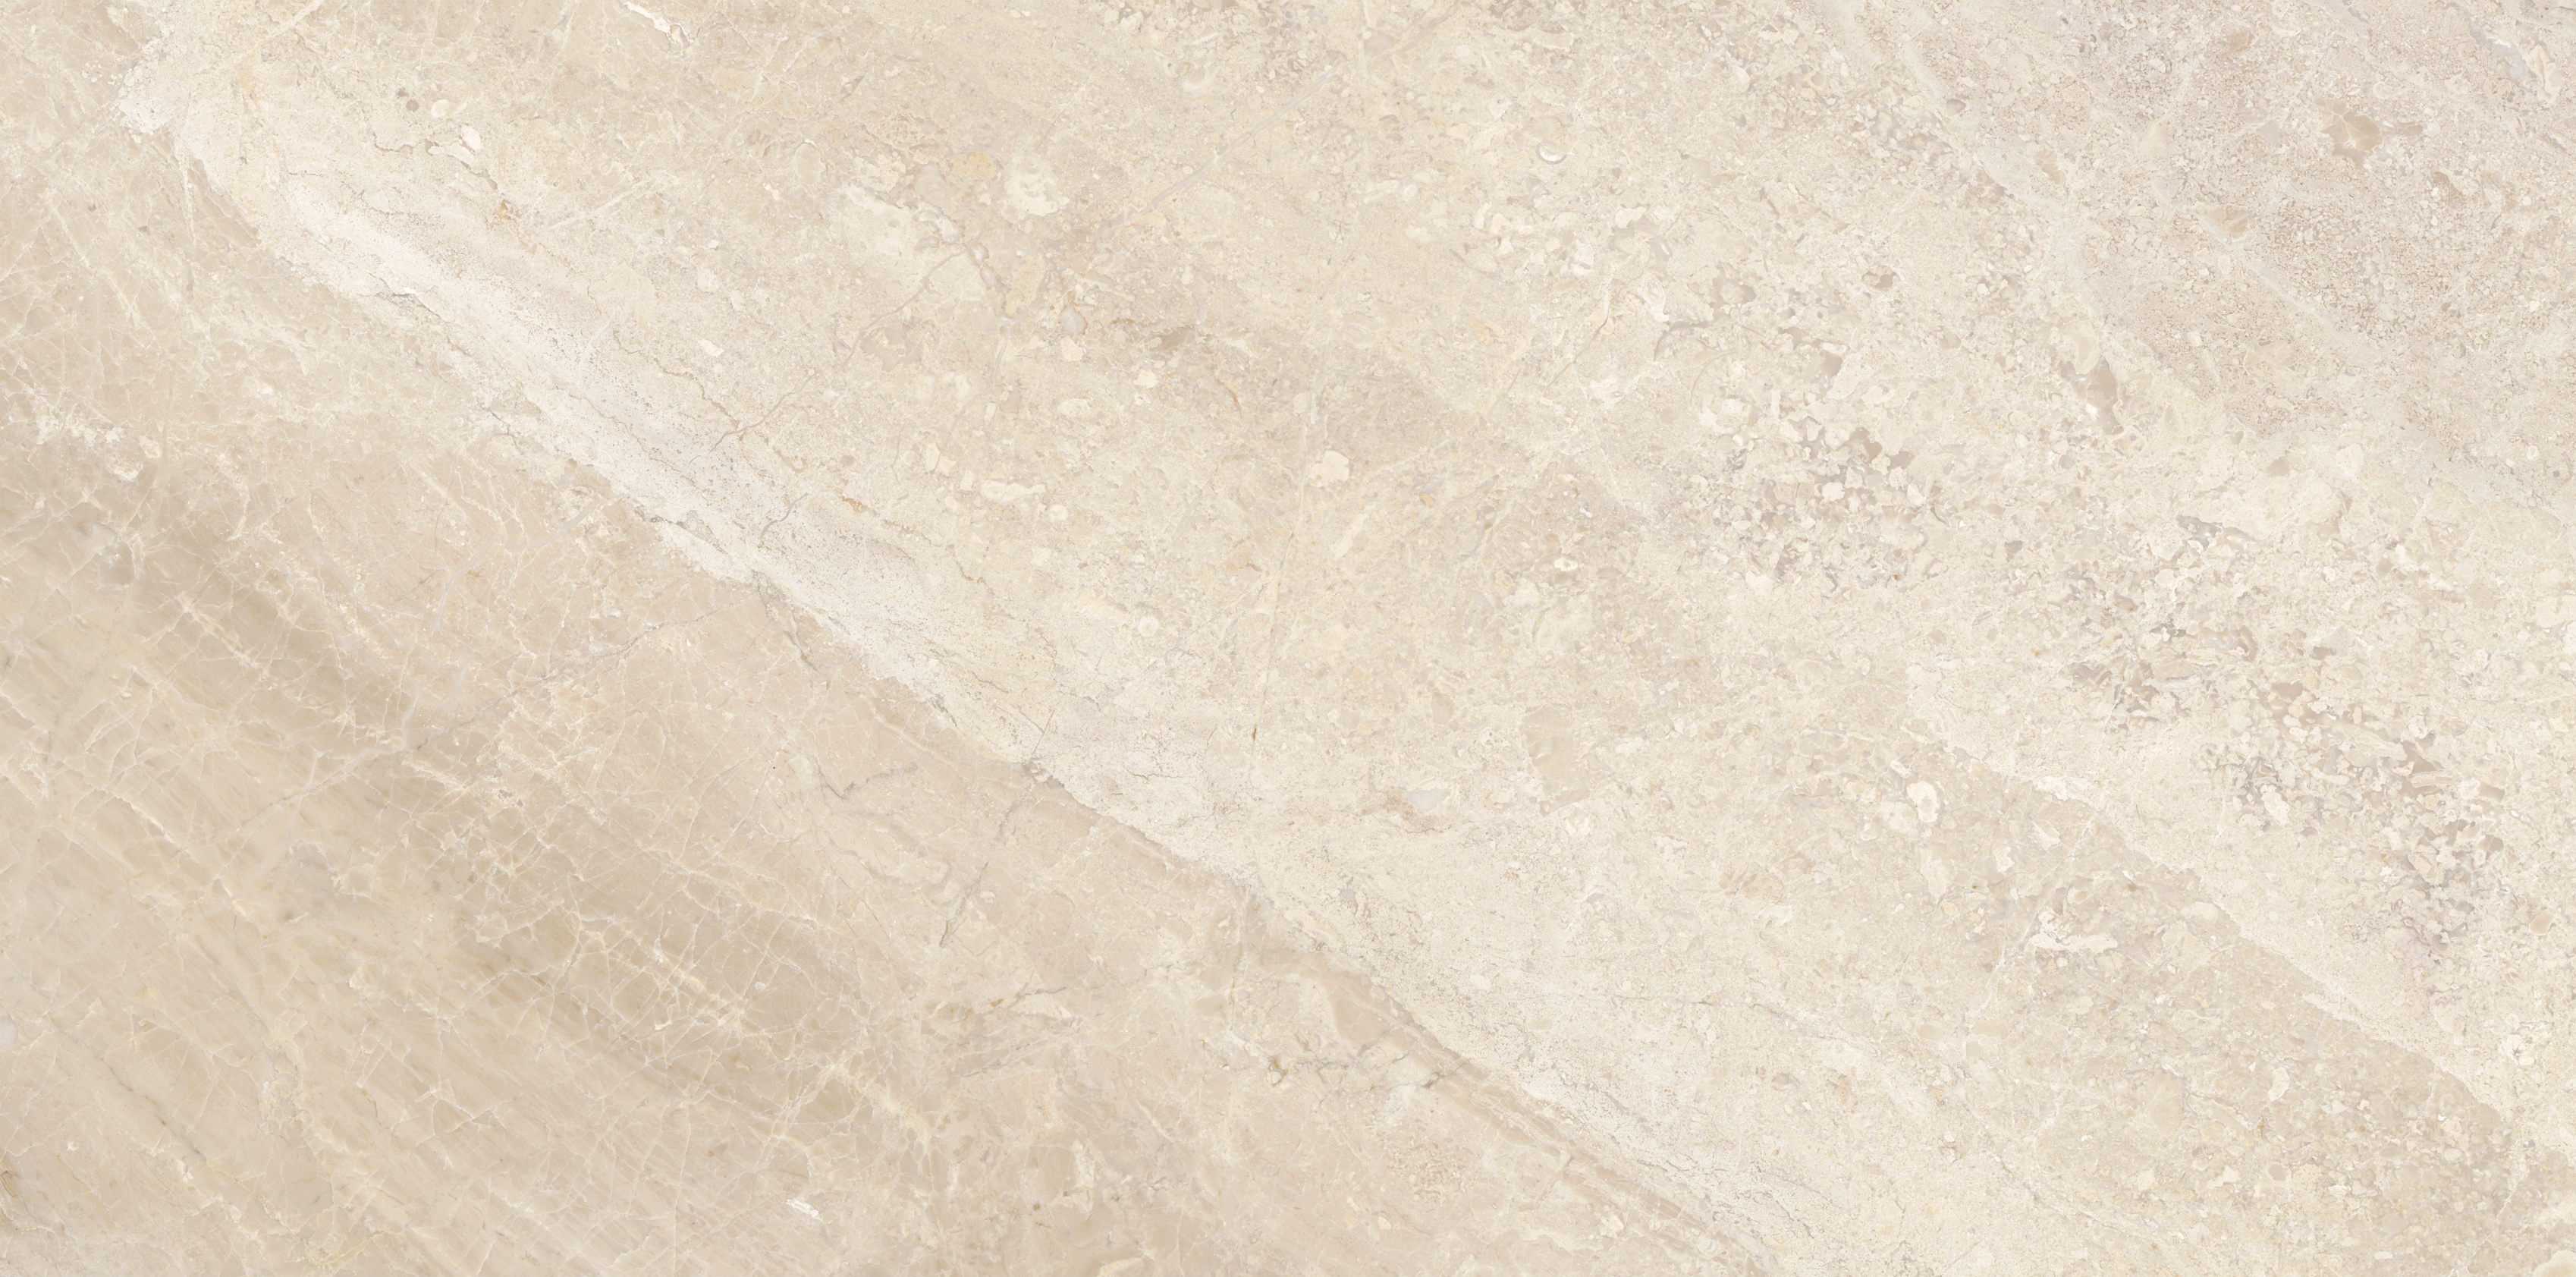 marble pattern natural stone field tile from impero reale anatolia collection distributed by surface group international polished finish straight edge edge 18x36 rectangle shape